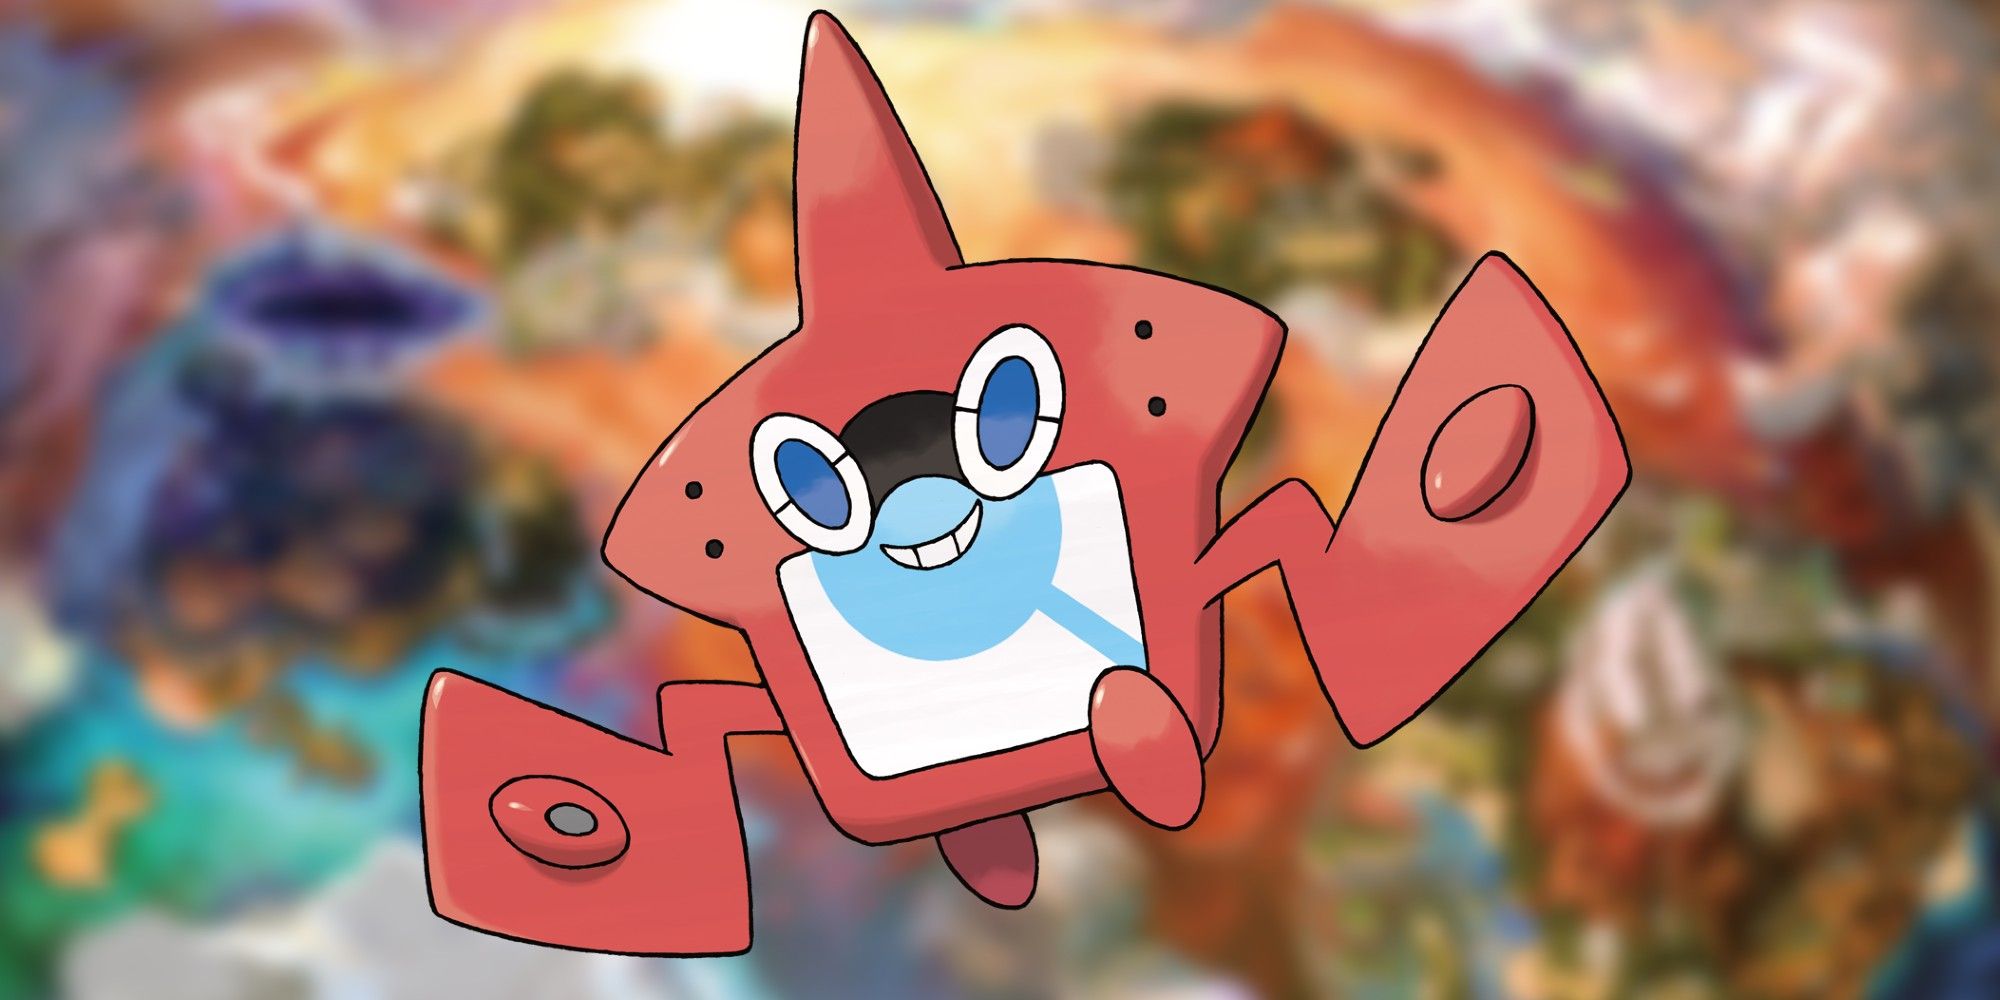 A Rotom Pokedex floating in front of a blurred map of Alola. It has a kind smile on its face.